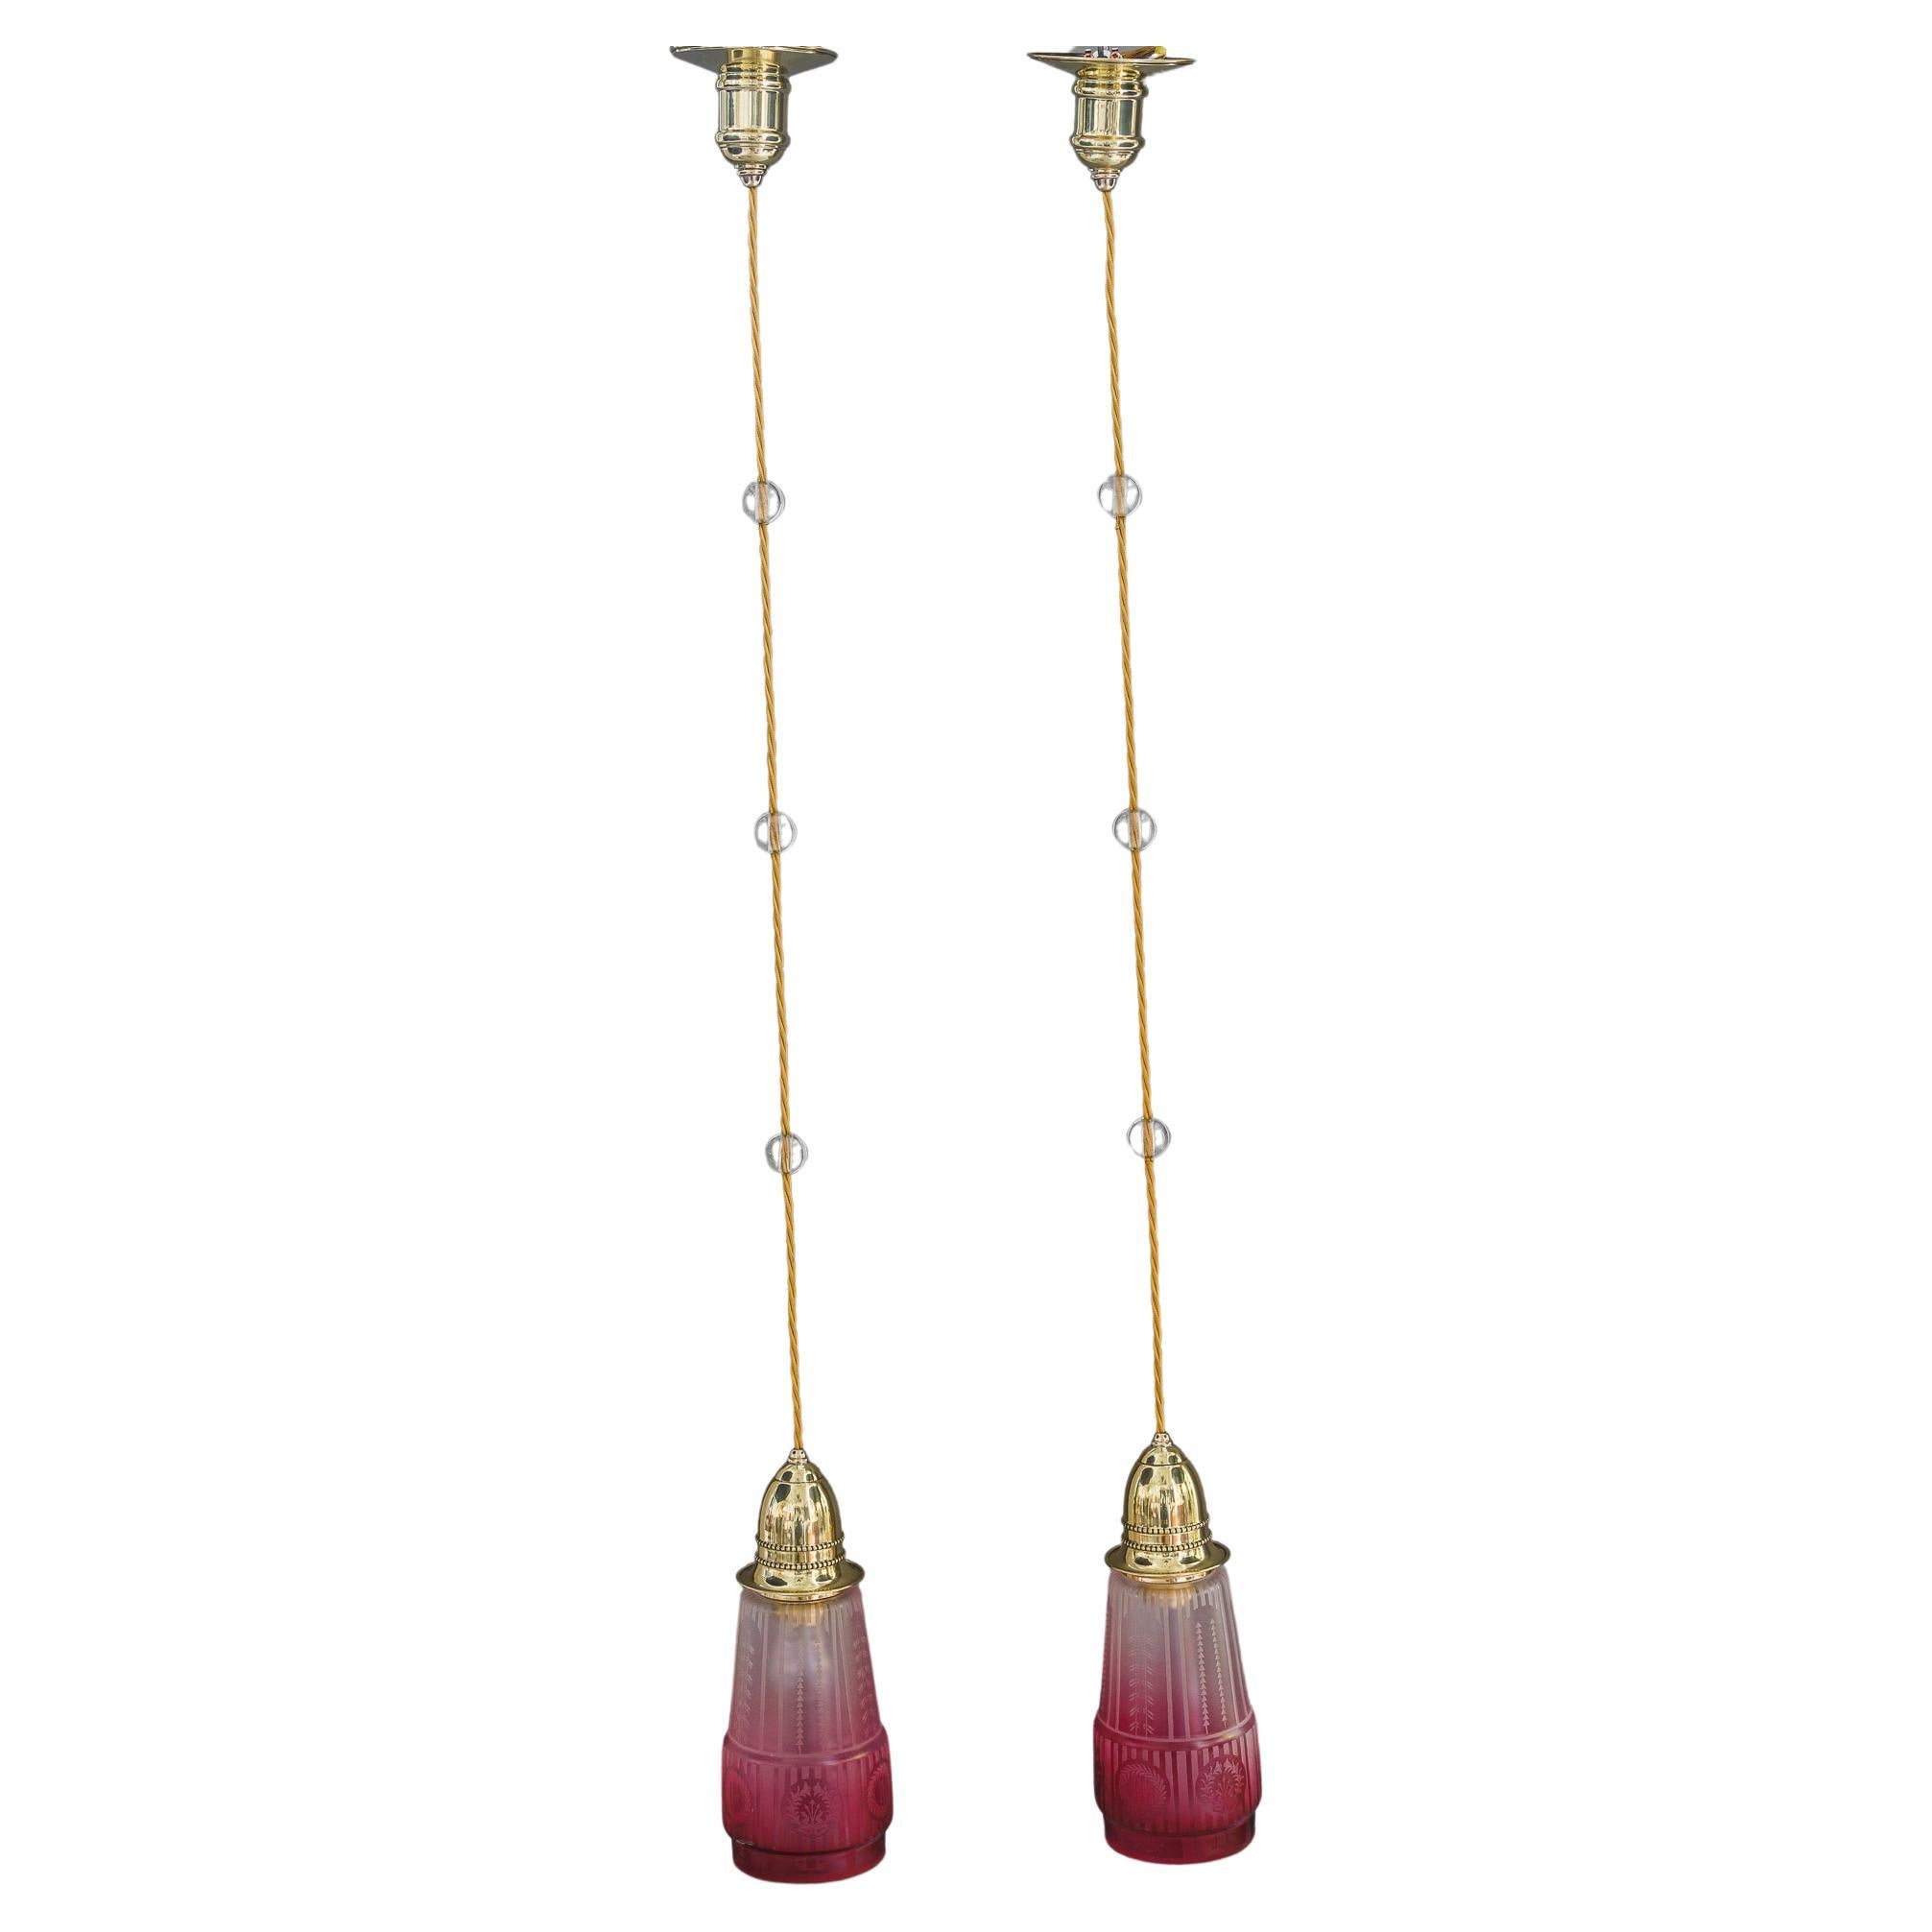 2x Art Deco Hanging Lamp with Original Old Glass Shades Vienna Around, 1920s For Sale